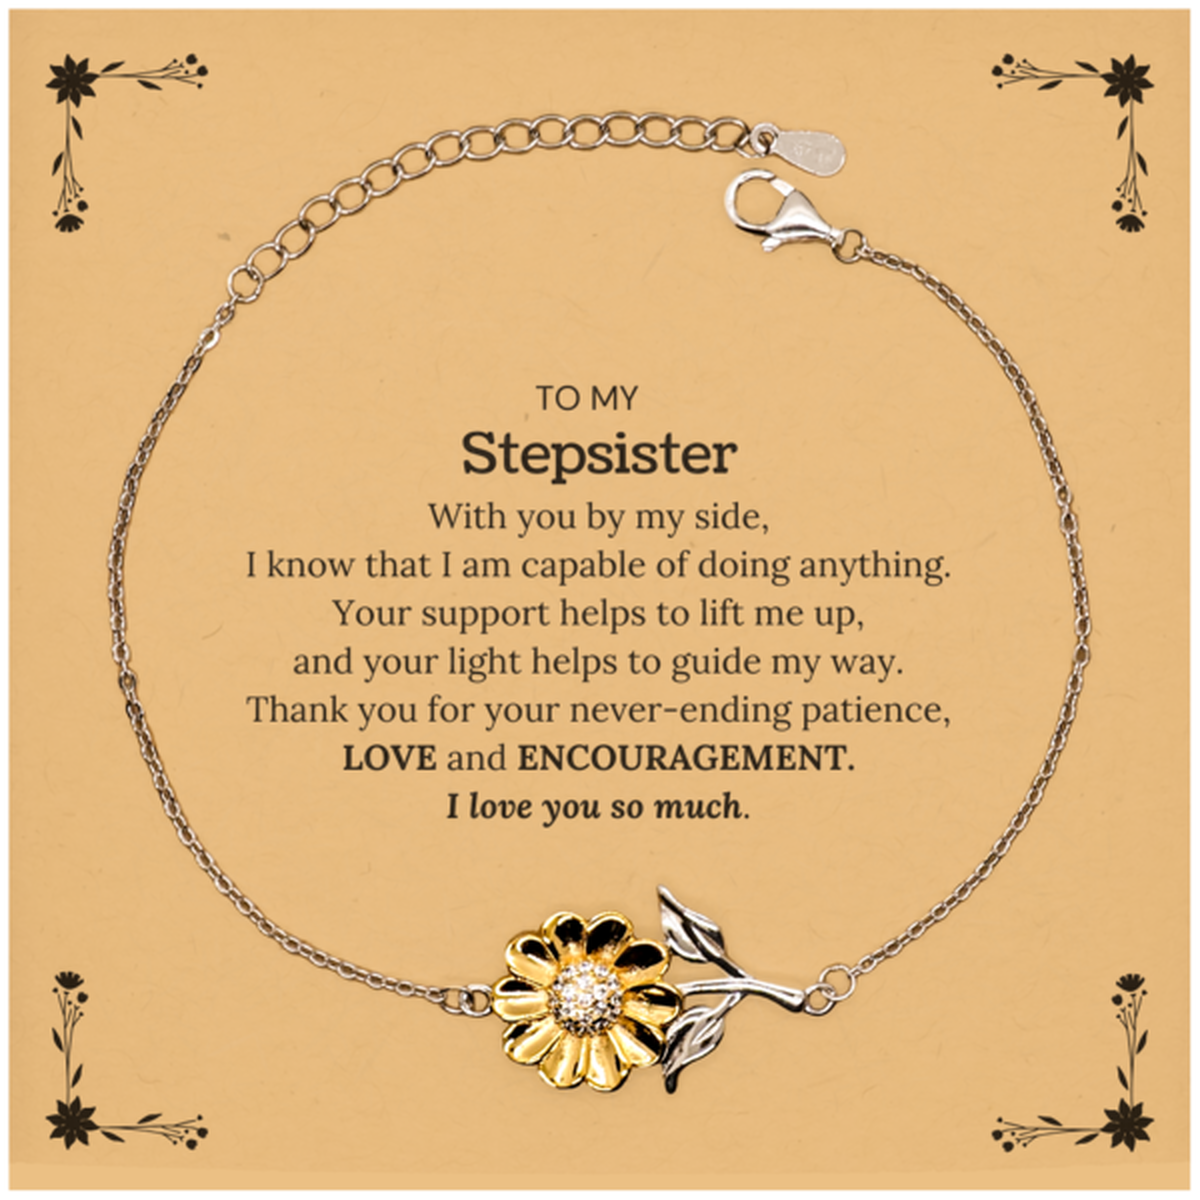 Appreciation Stepsister Sunflower Bracelet Gifts, To My Stepsister Birthday Christmas Wedding Keepsake Gifts for Stepsister With you by my side, I know that I am capable of doing anything. I love you so much